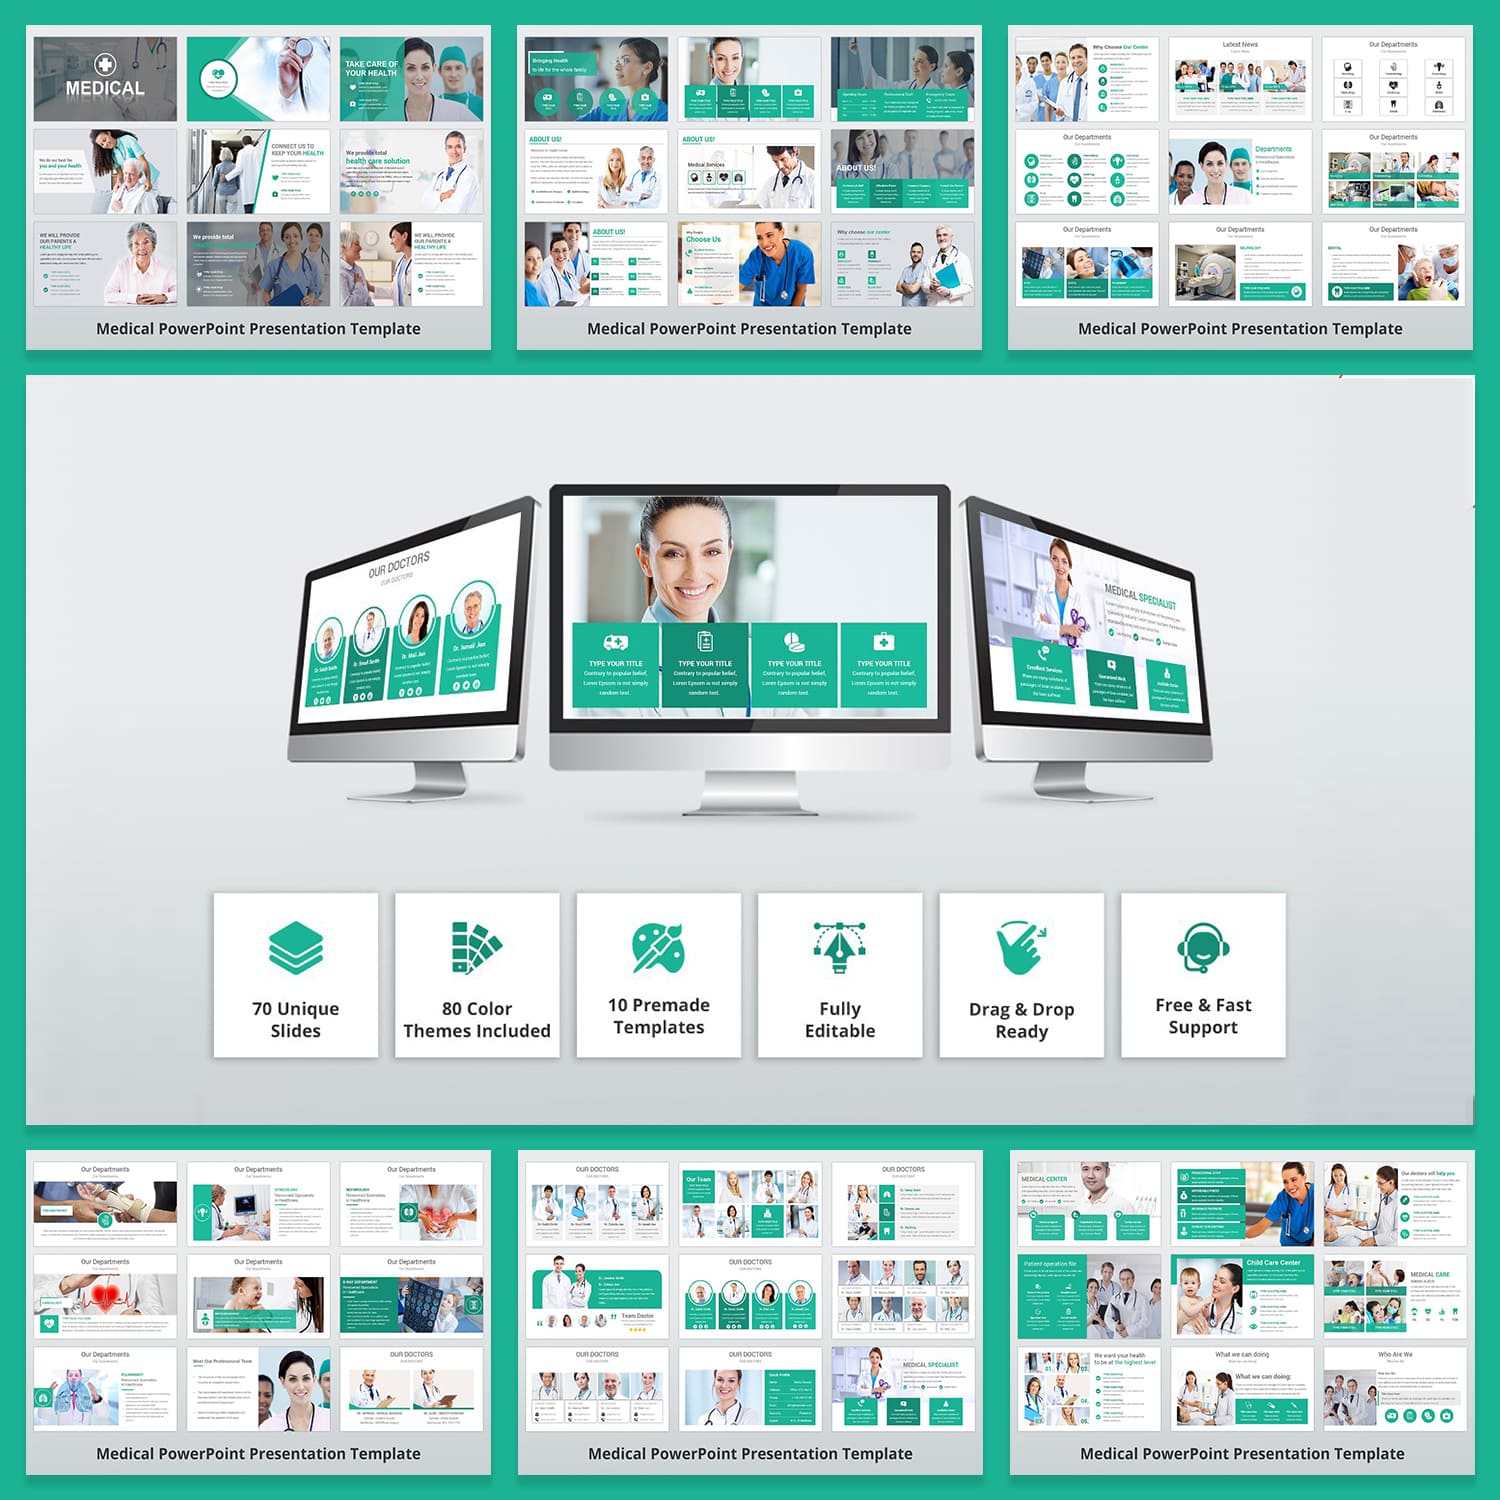 Medical PowerPoint Template cover image.